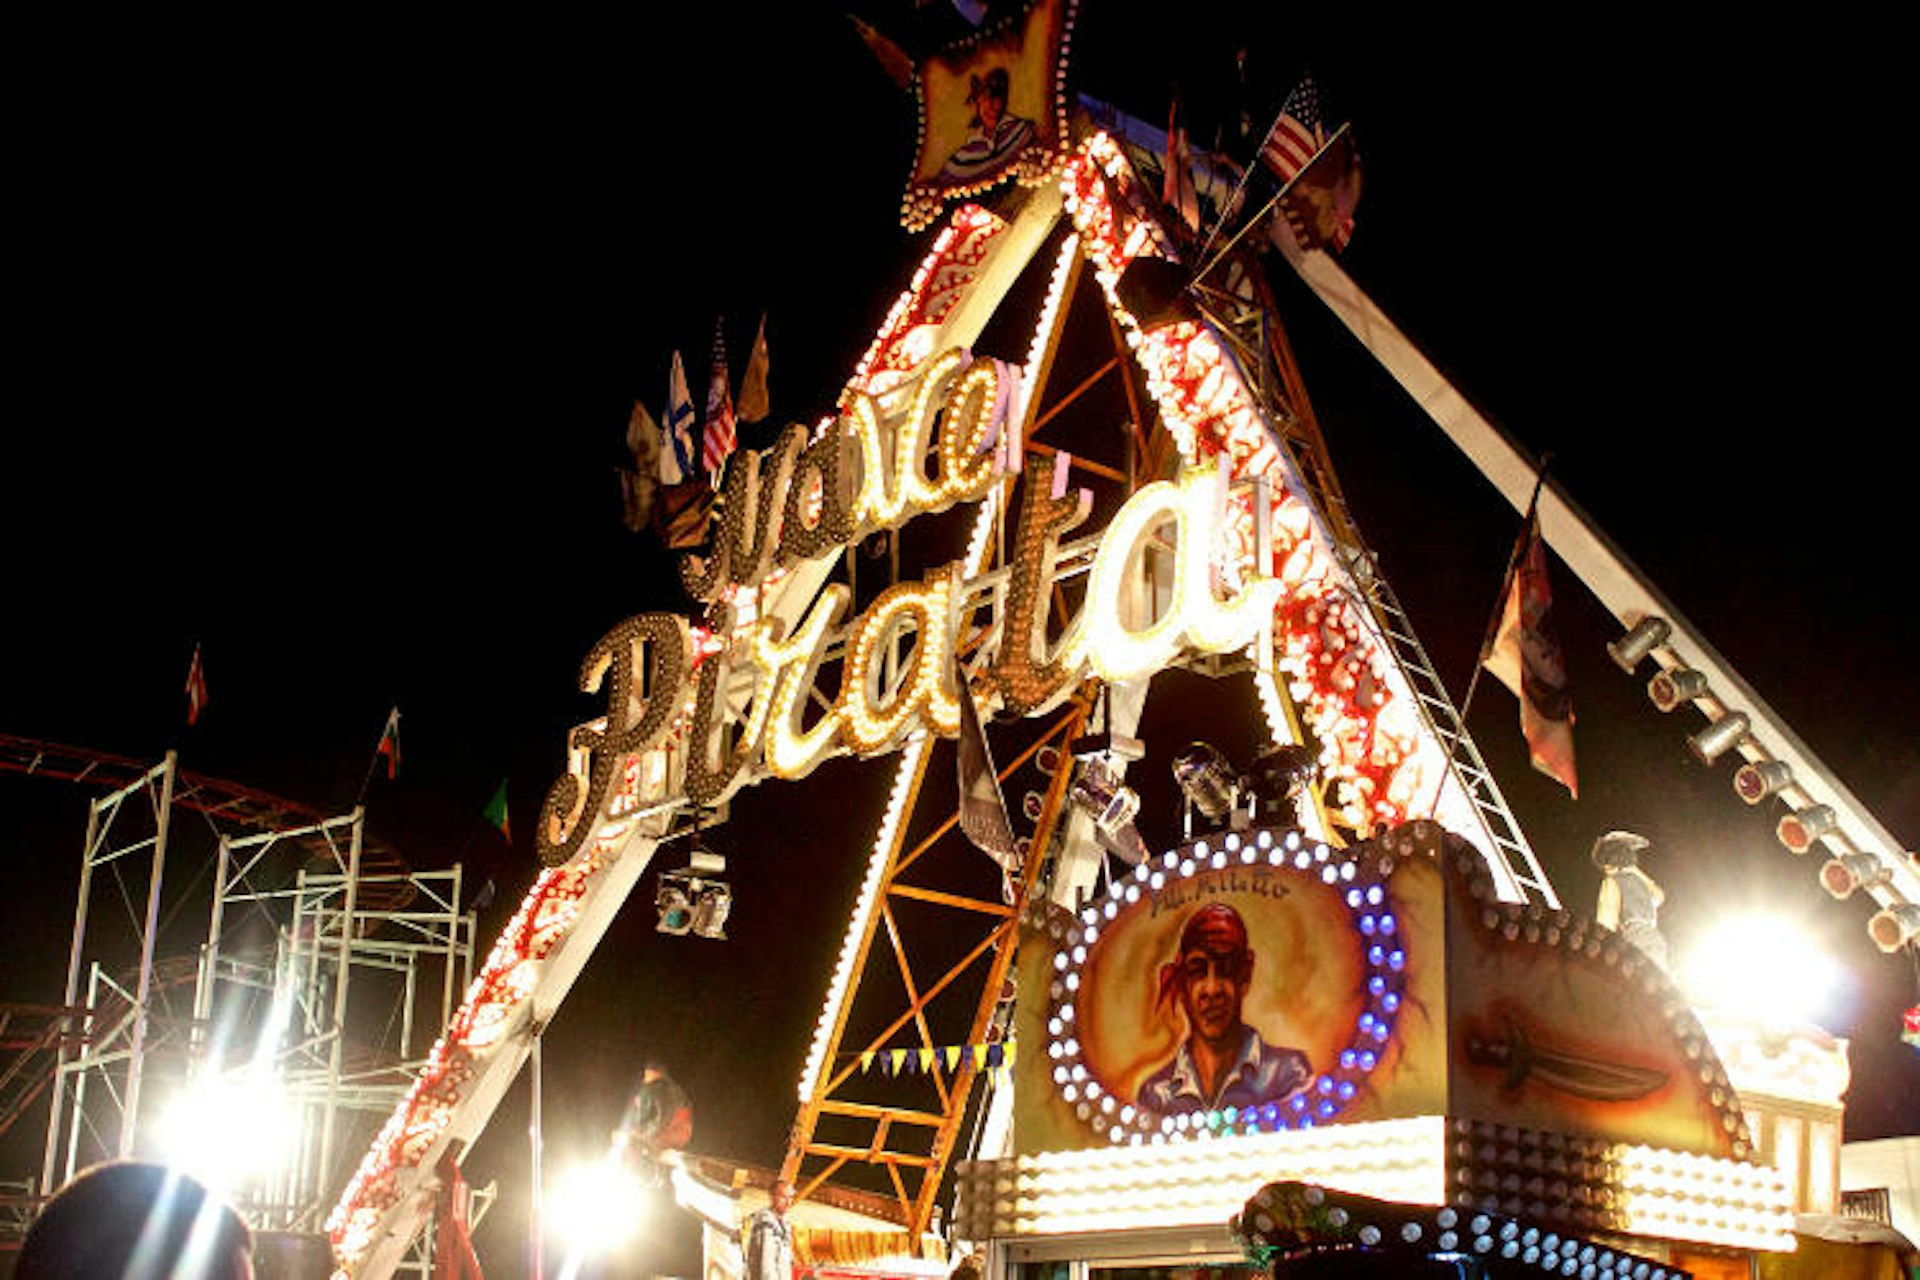 A flashy amusement park during Belgrade Beerfest 2013. Image by lab604 / CC BY 2.0